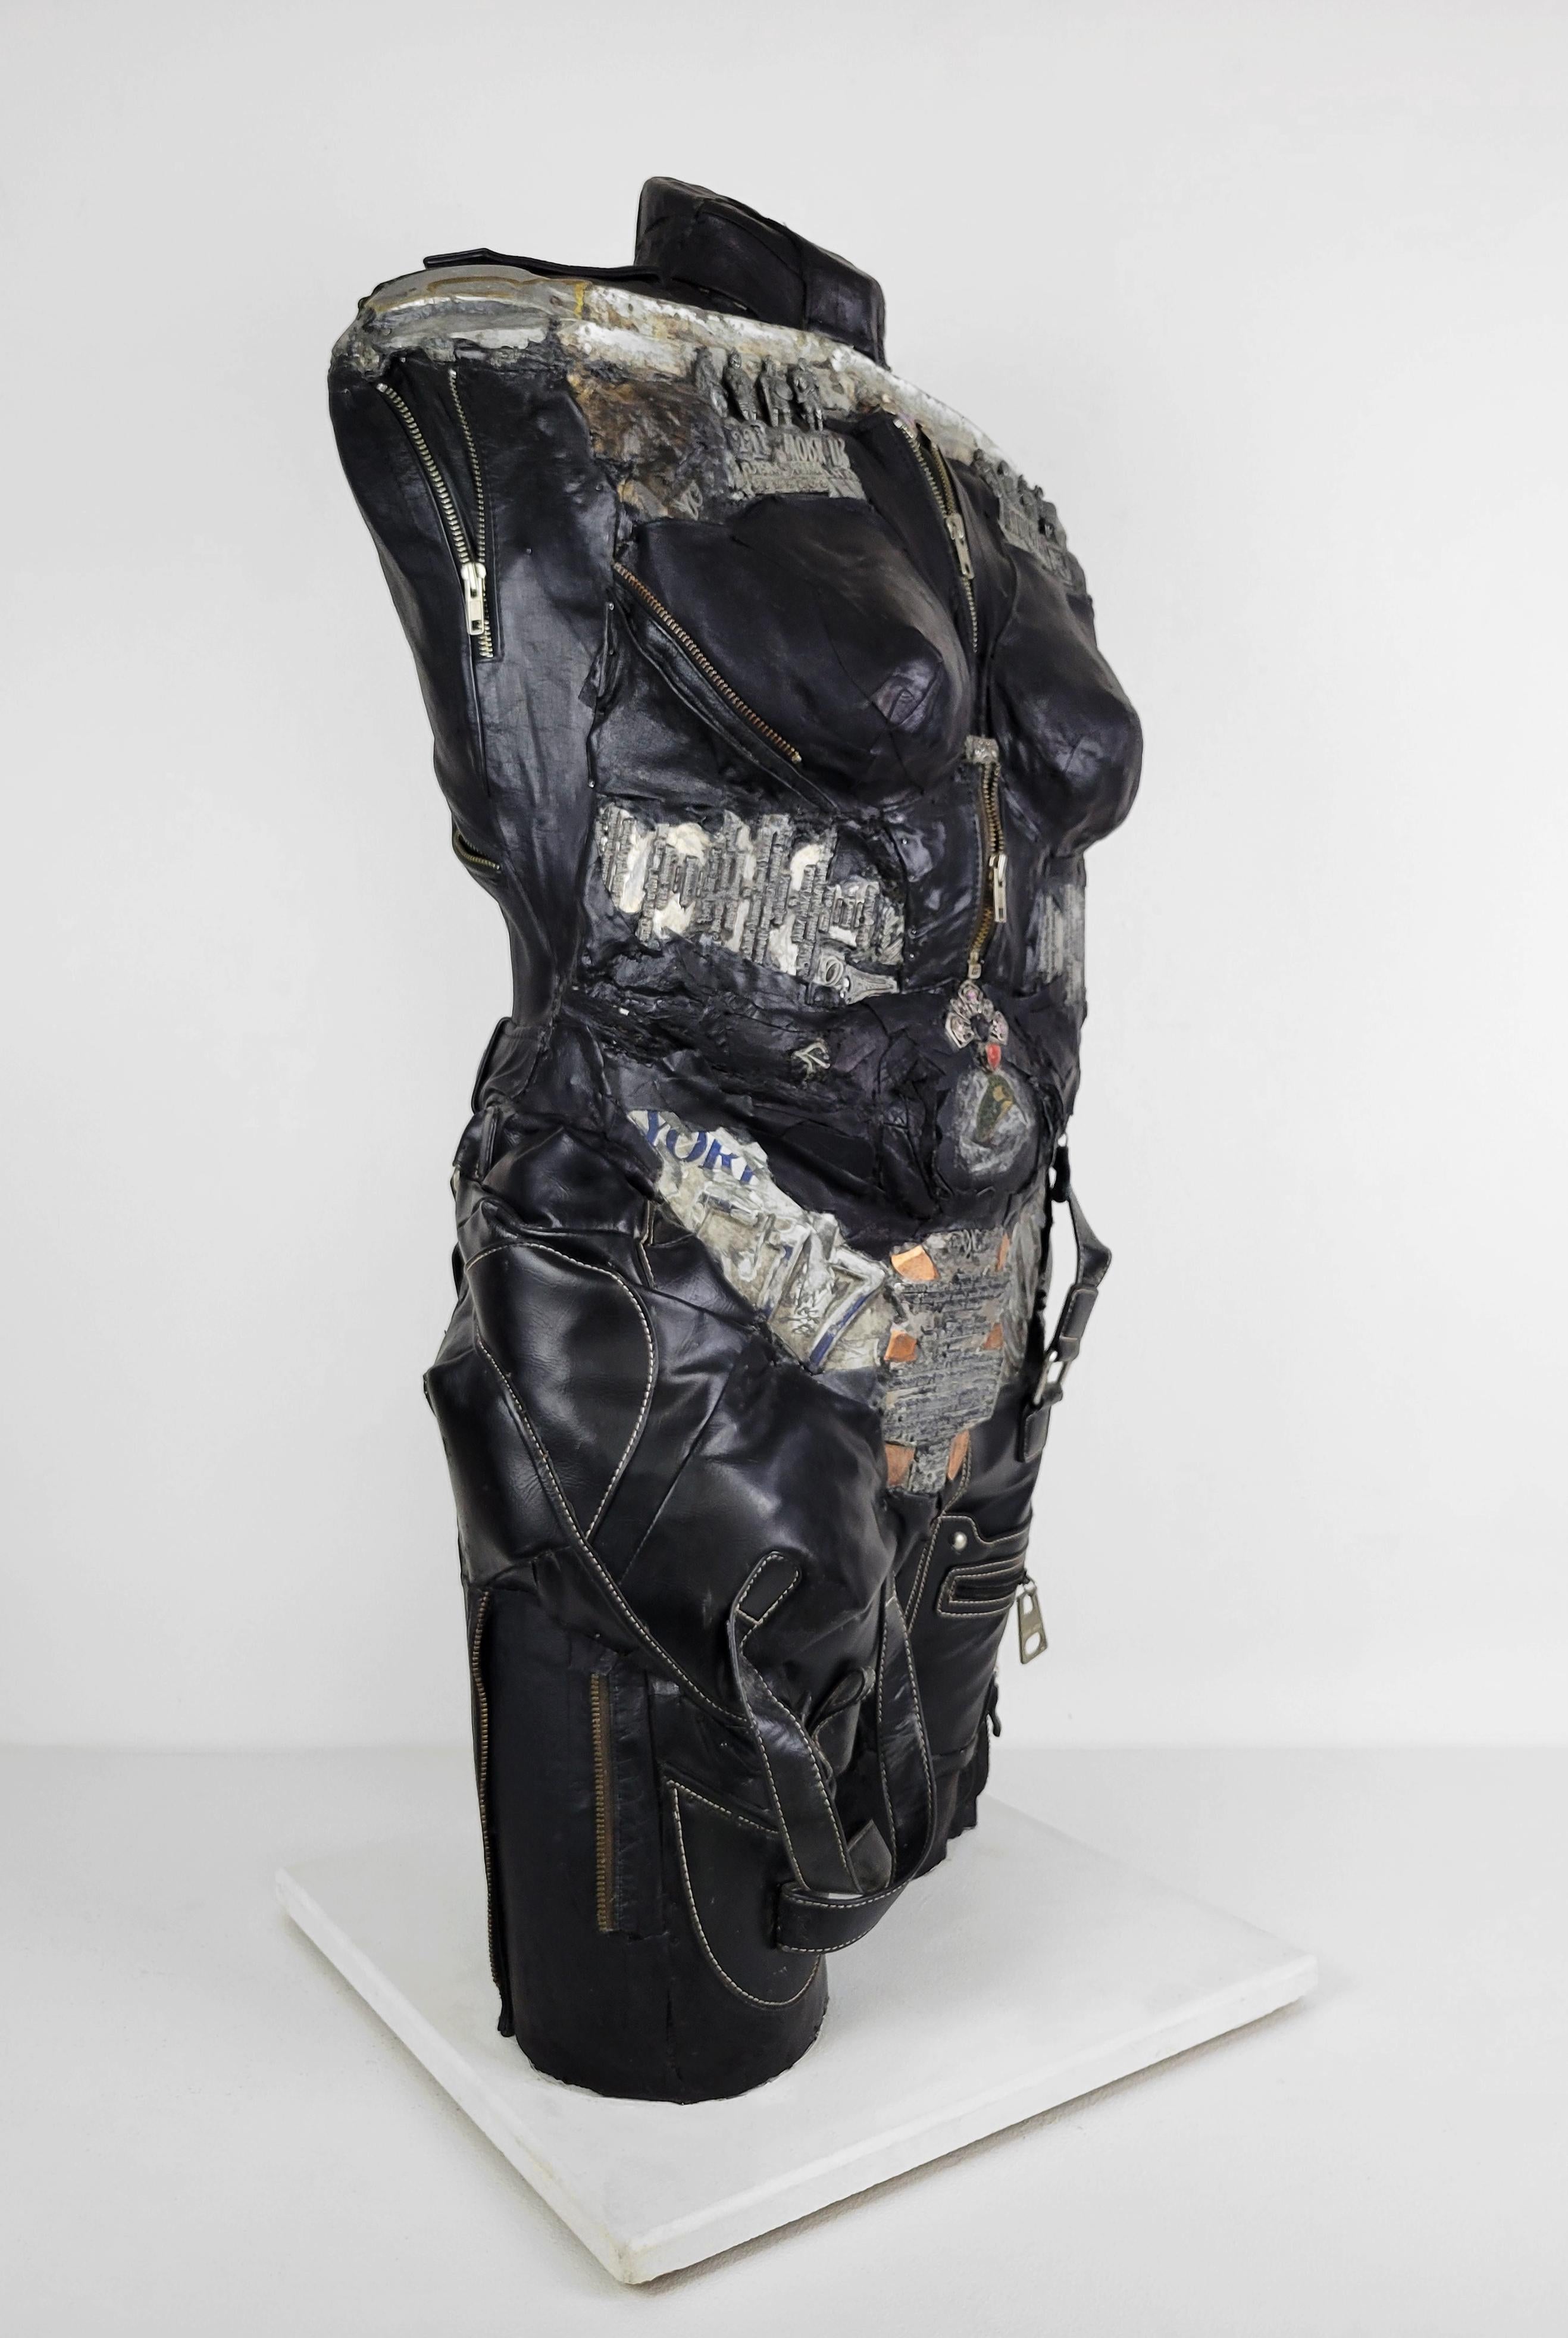 Linda Stein, GenderBend 682 - Feminist Contemporary Black/Silver Leather Metal Torso Sculpture

Starting in 2007, the artist Linda Stein began to explore gender multiplicities and diversities in her sculptural series The Fluidity of Gender.  The